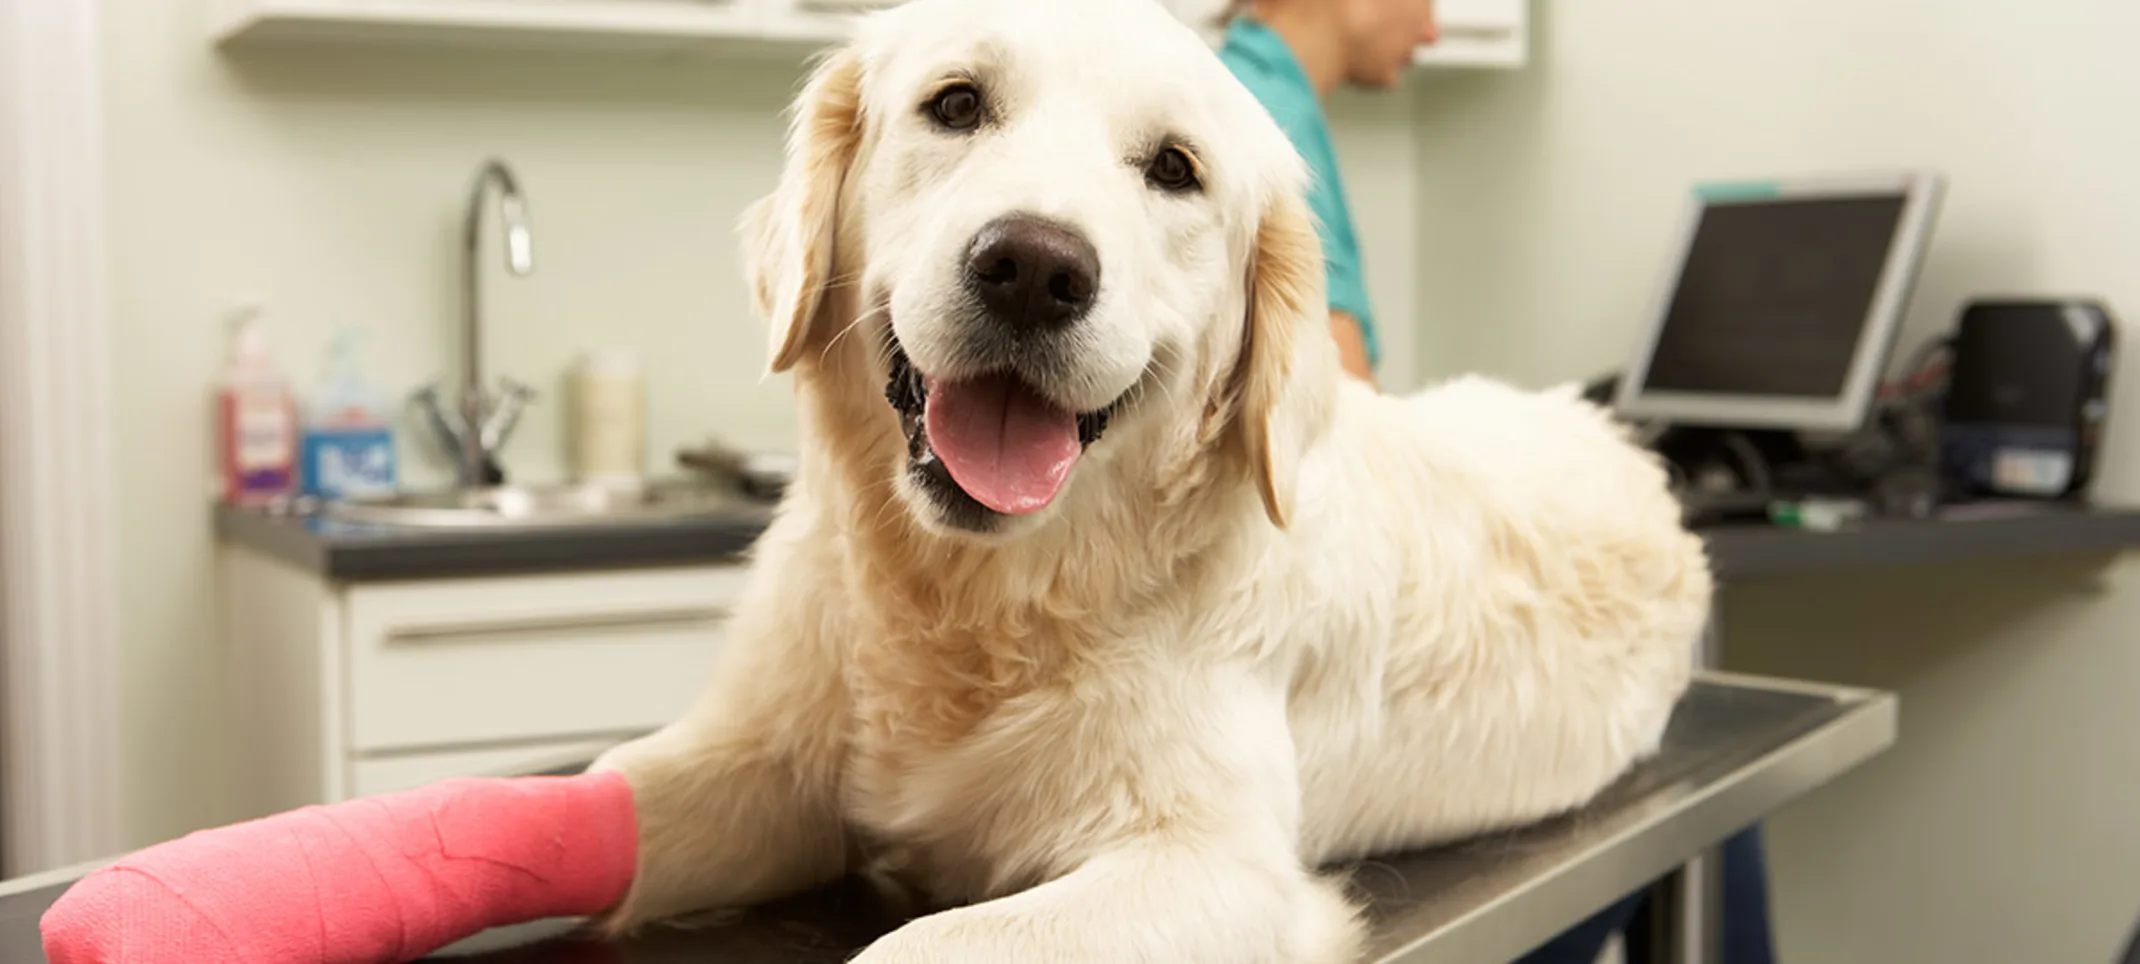 Dog on examination table with pink cast on